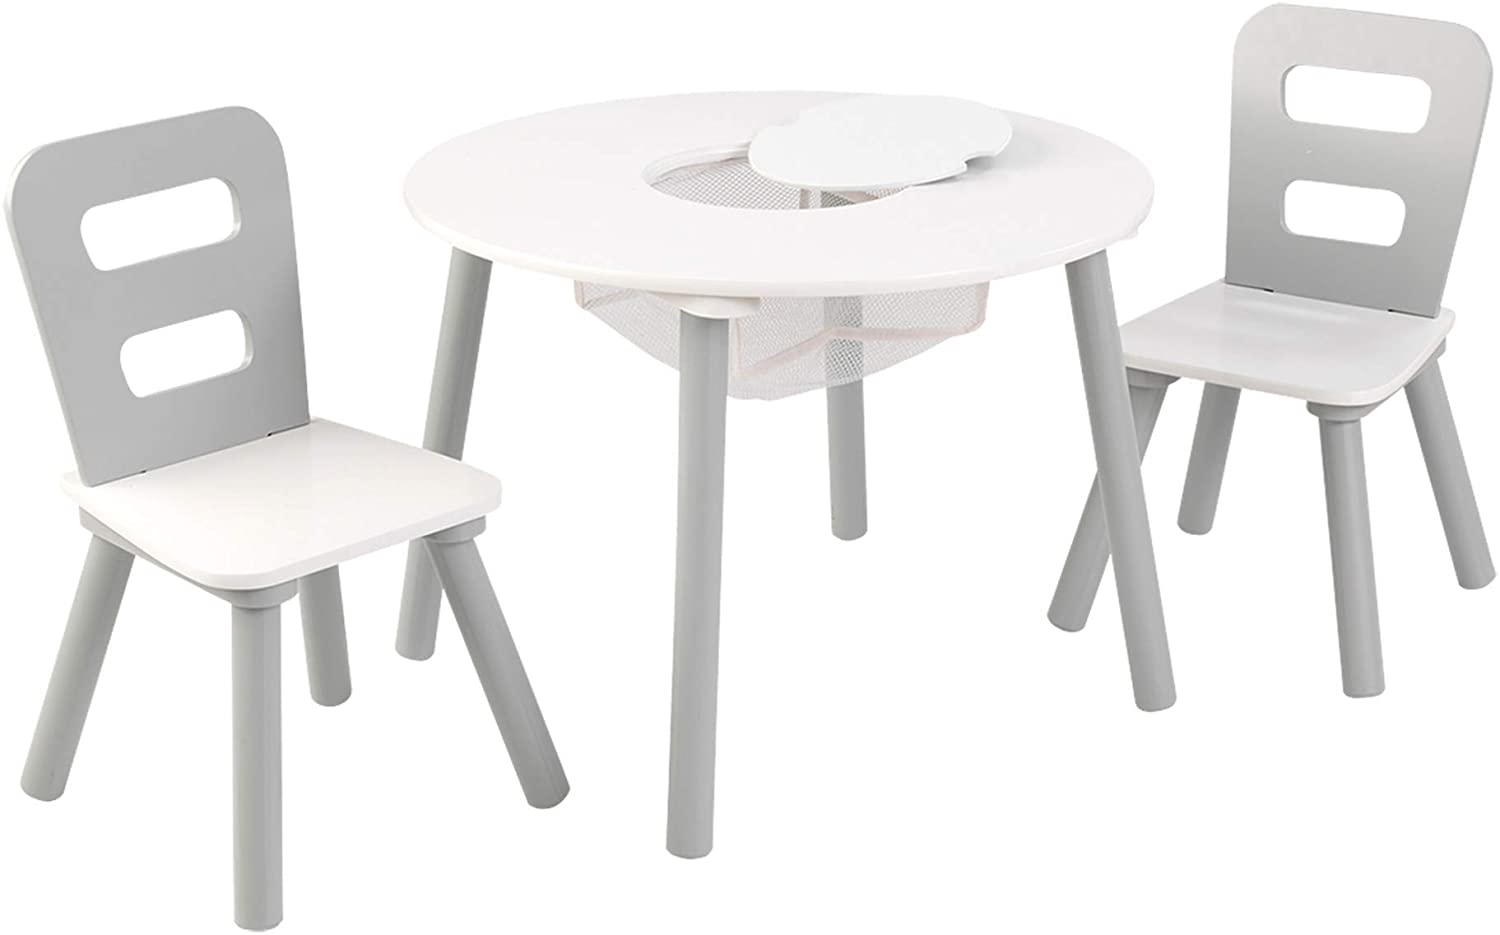 Round Table and 2 Chair Set for kids (Gray) Deals499